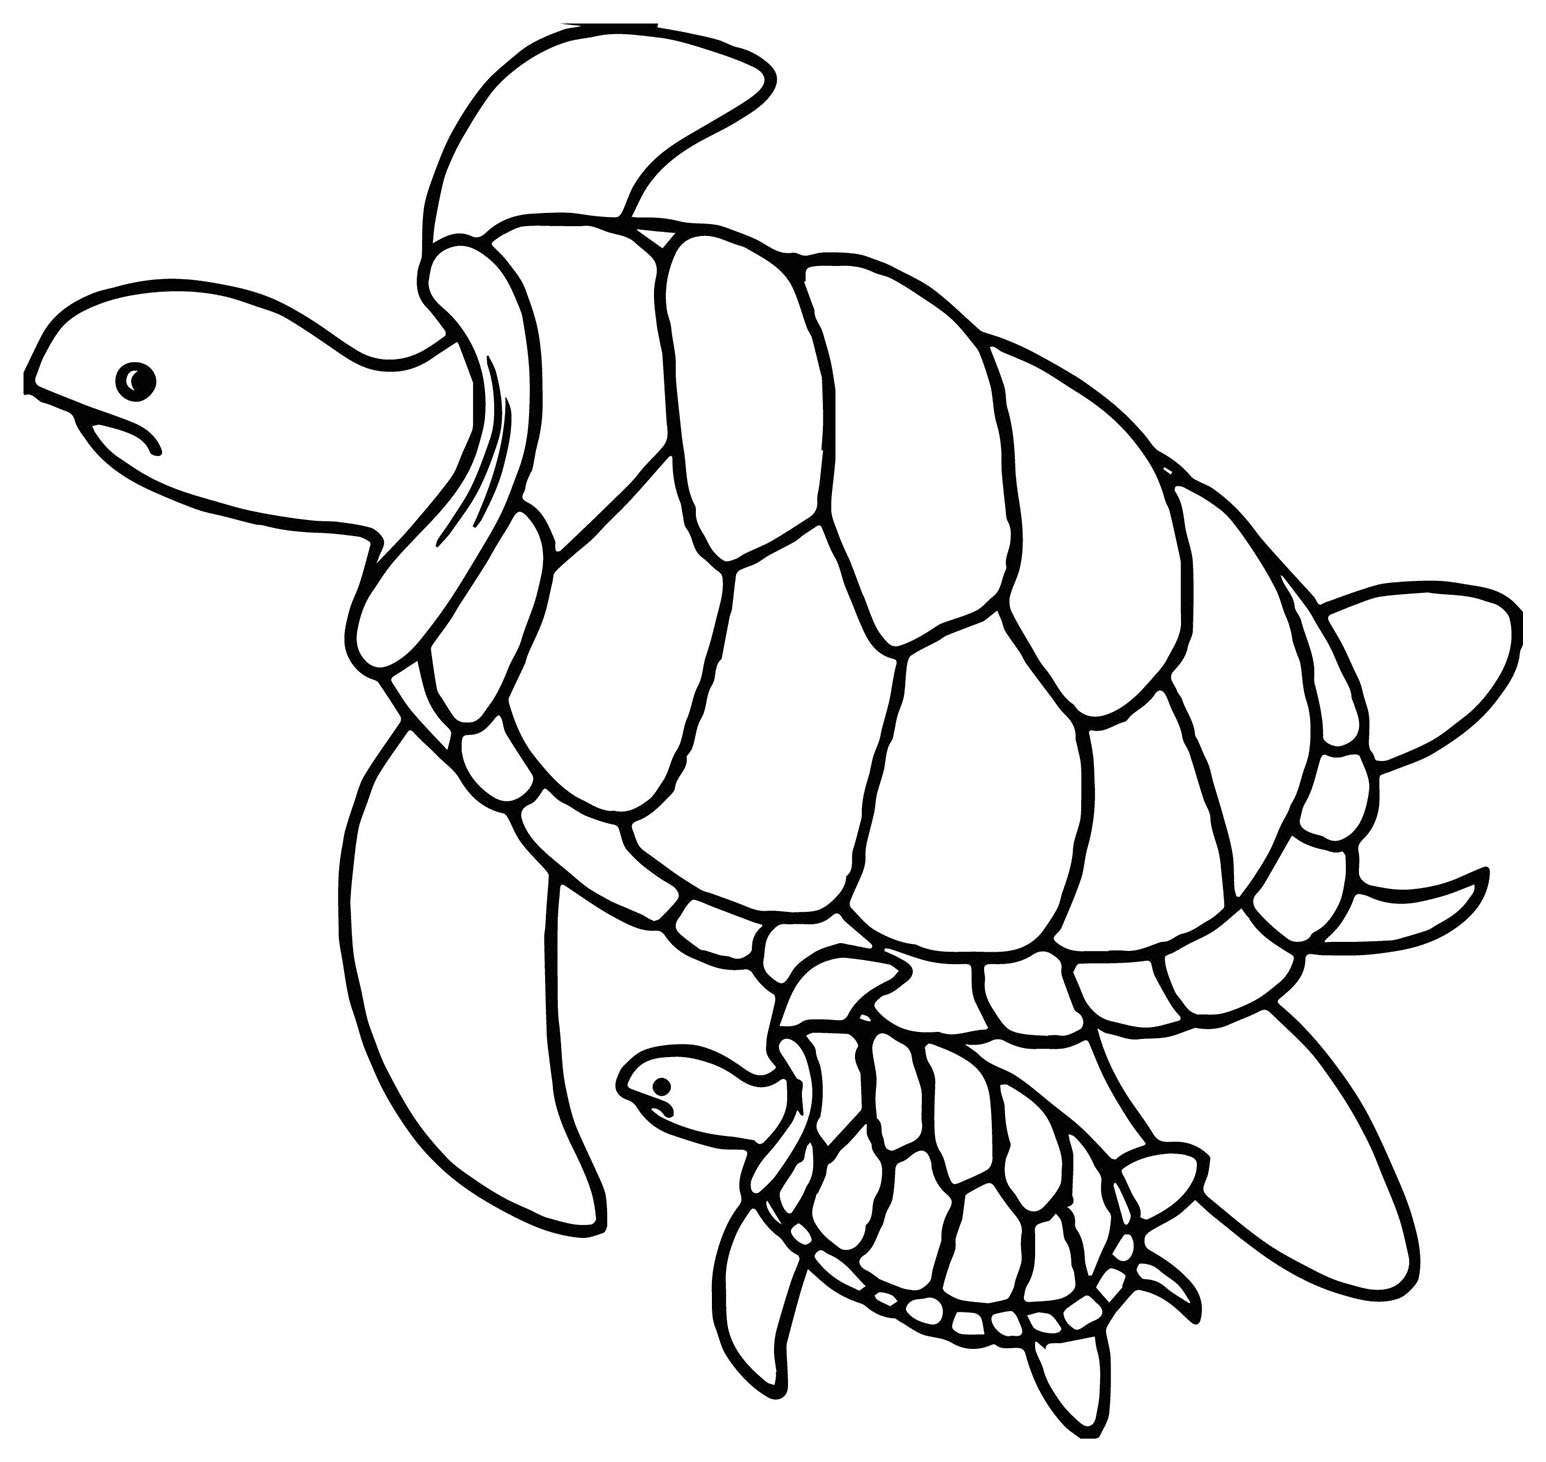 Color this beautiful turtle coloring page with your favorite colors